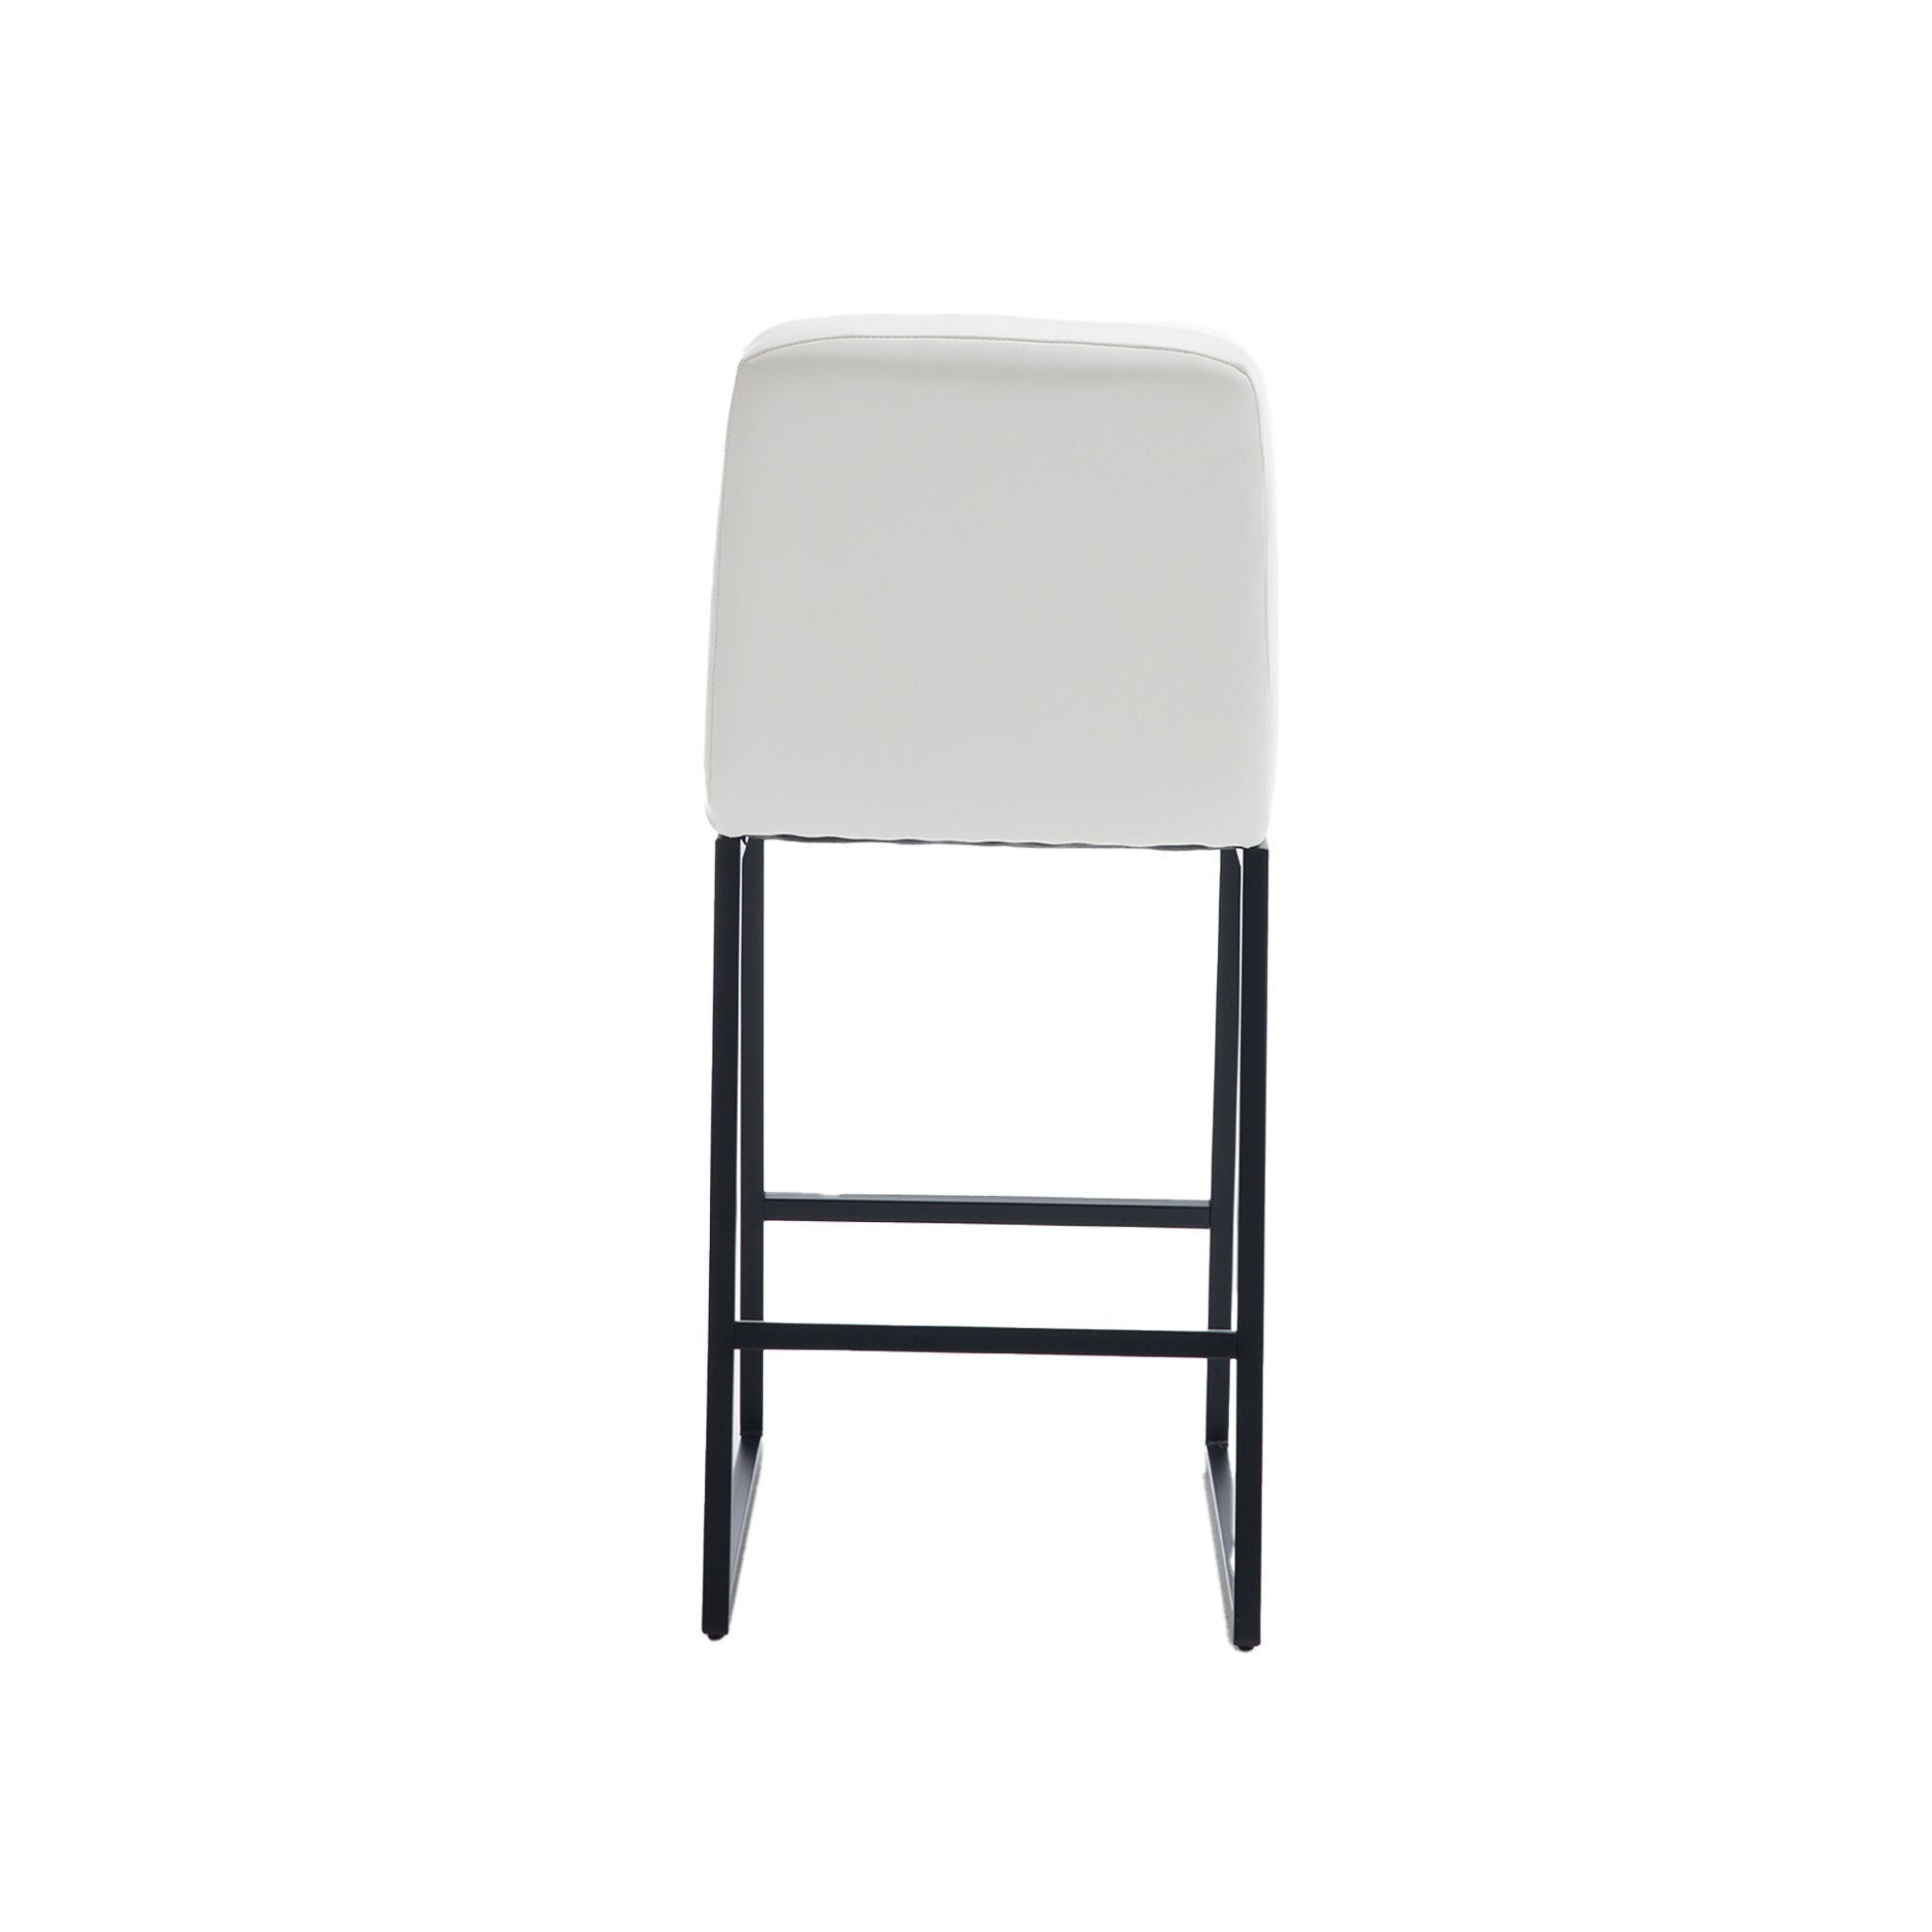 Low Bar Stools Set of 2 Bar Chairs for Living Room cream-kitchen-foam-dry clean-modern-bar